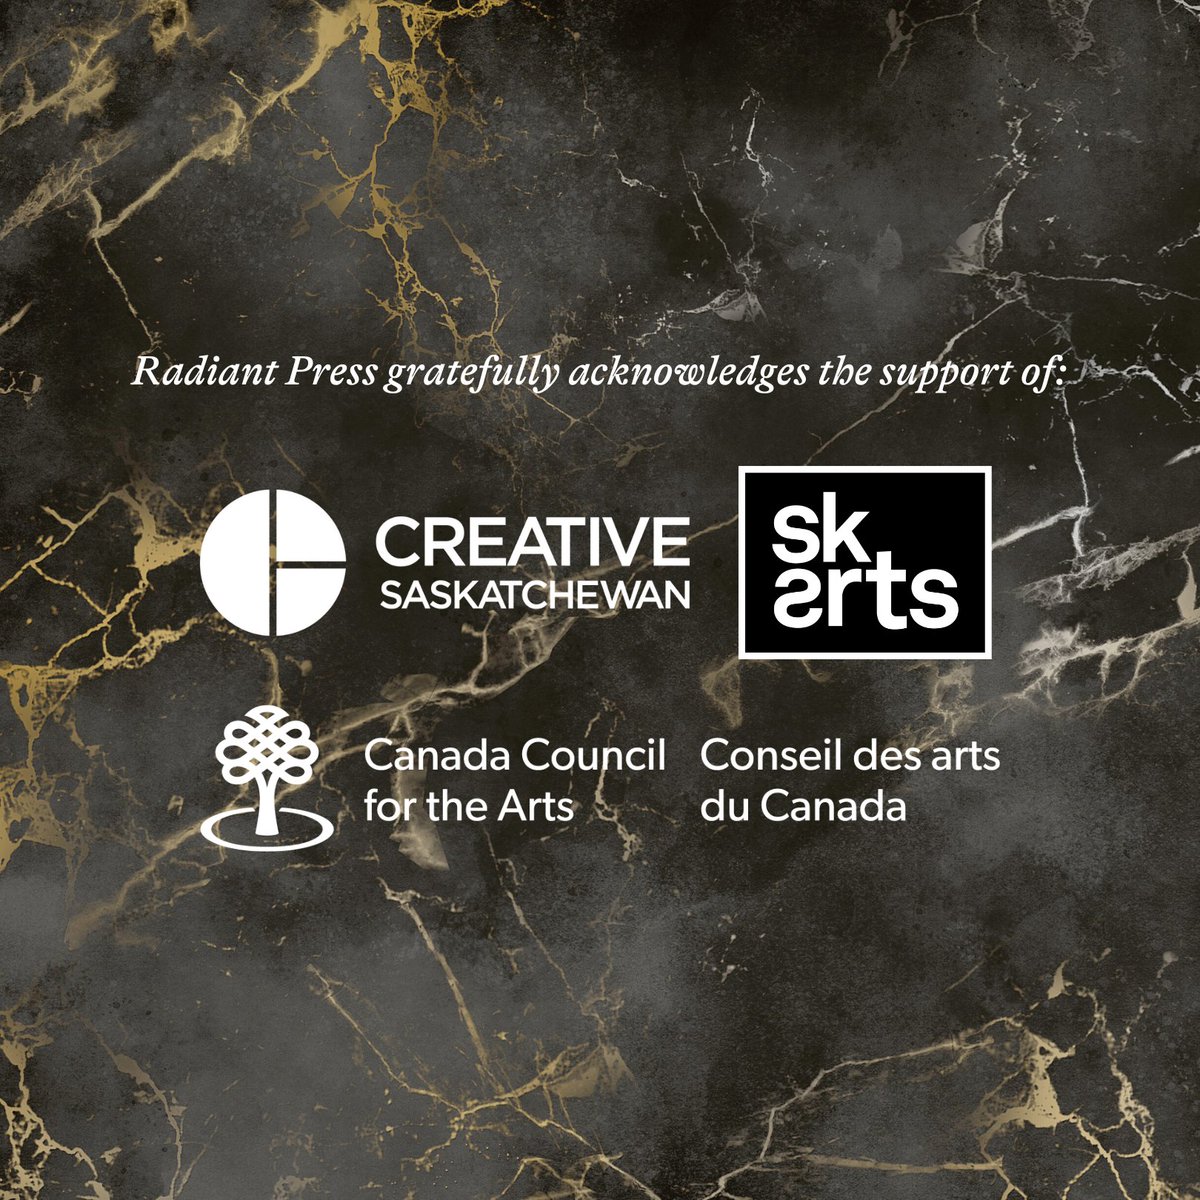 Radiant Press gratefully acknowledges the support of @creativesask, @saskarts, and @canadacouncil. [9/9]